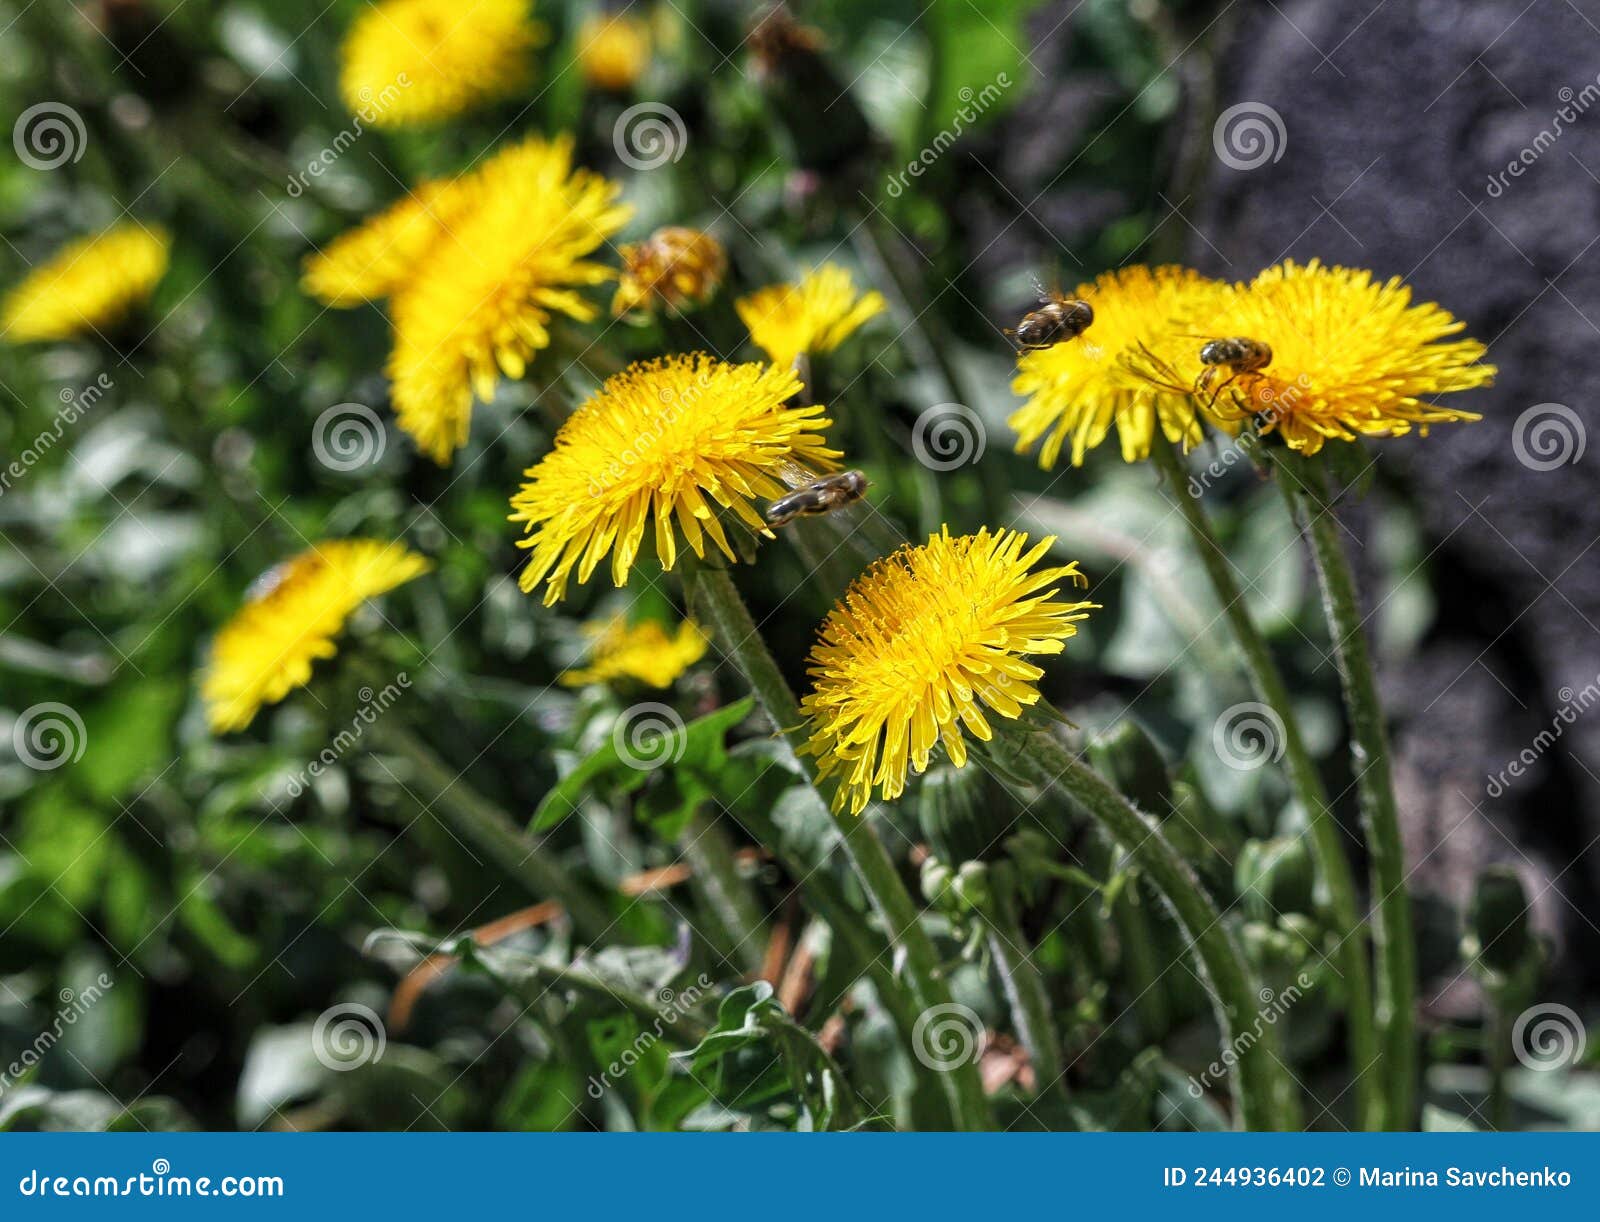 yellow dandelions close up, summer . the insectes is flying